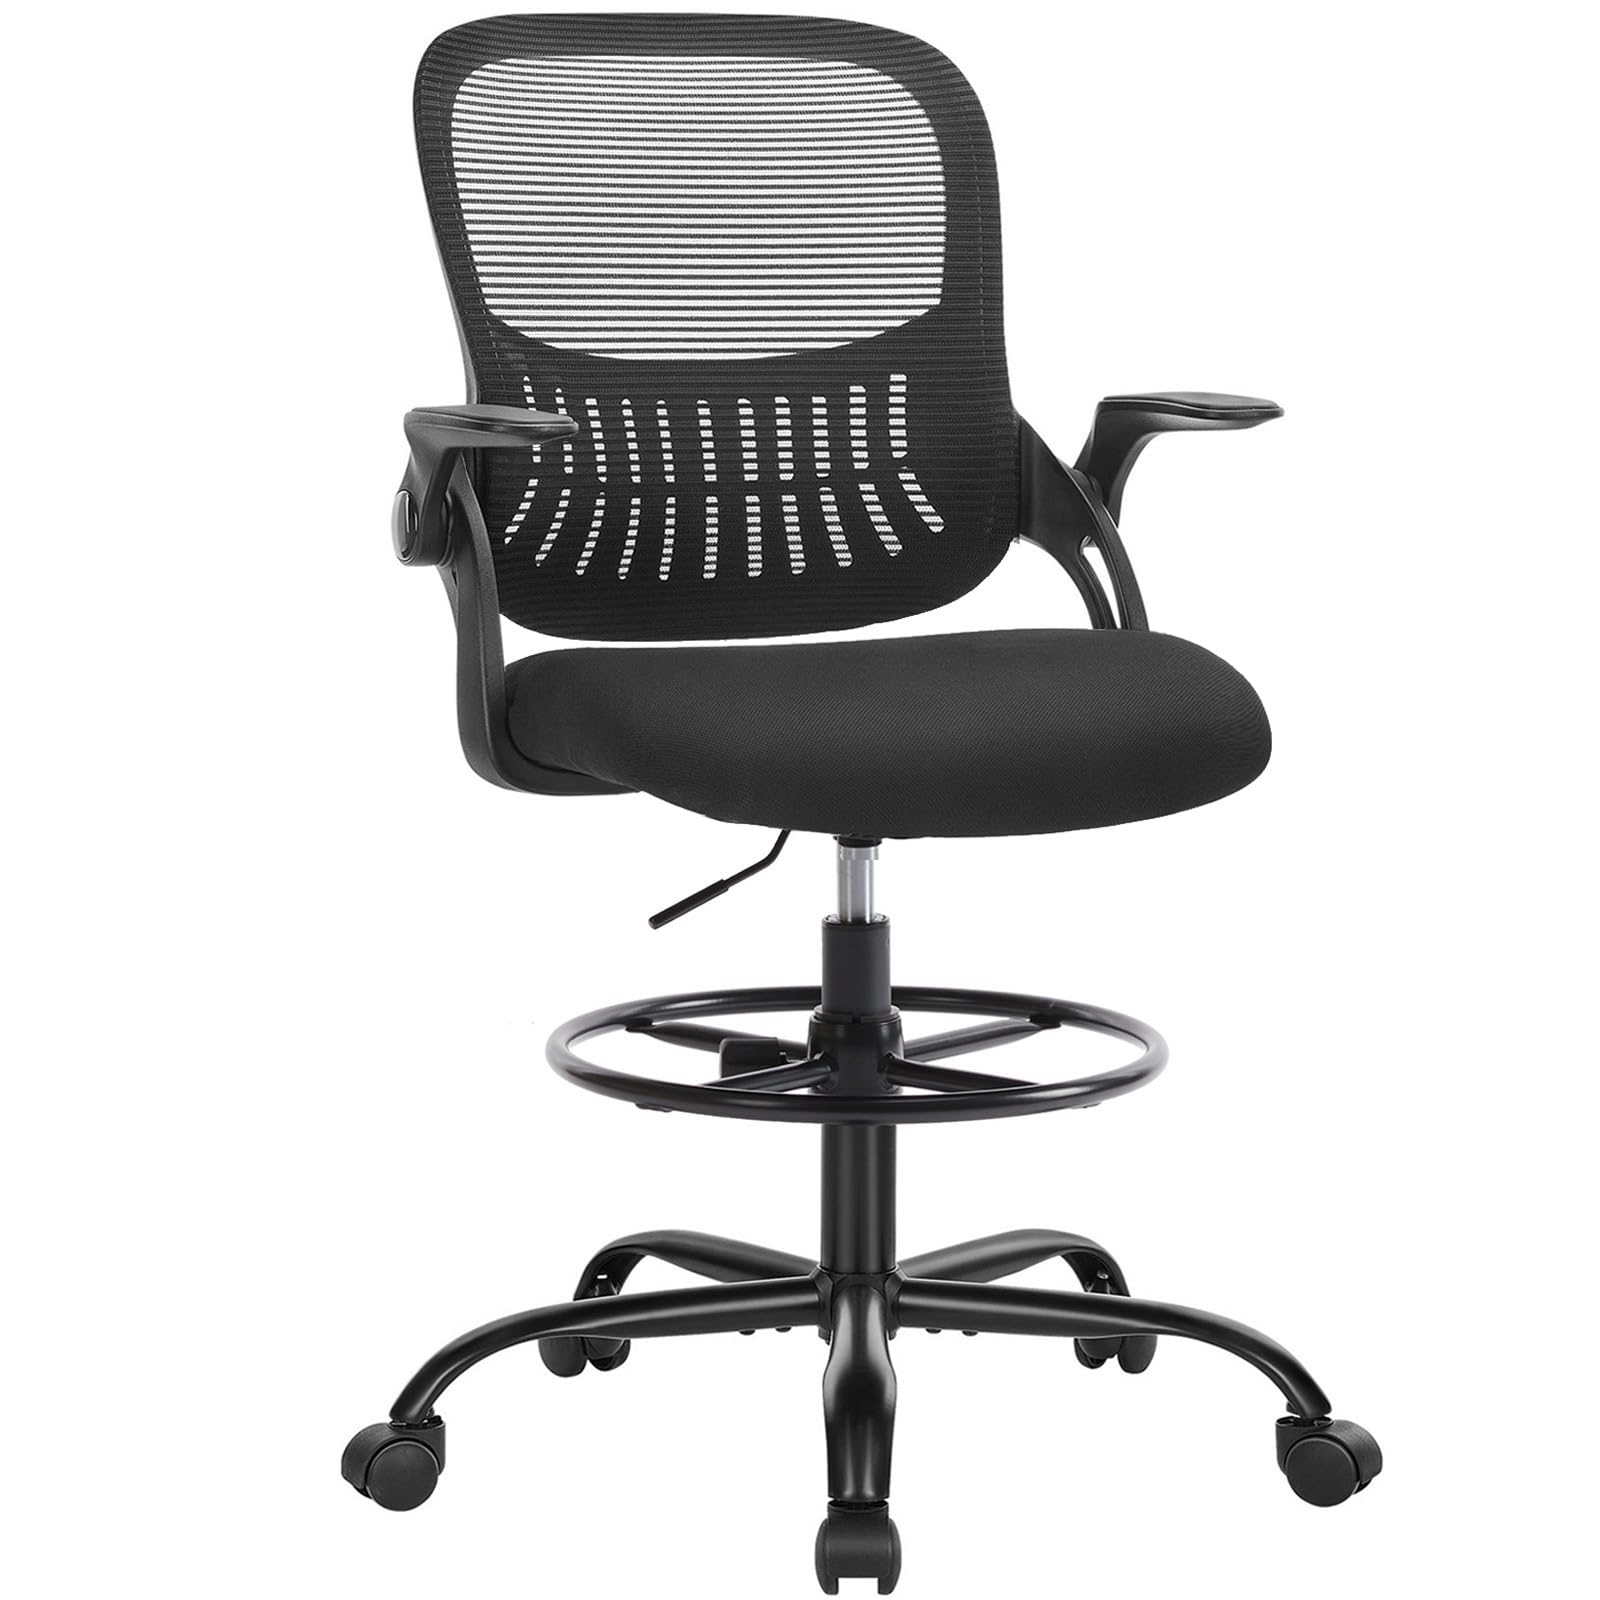 Tall Office Chair for Standing Desk with Adjustable Foot Ring,Counter Height Office Chairs